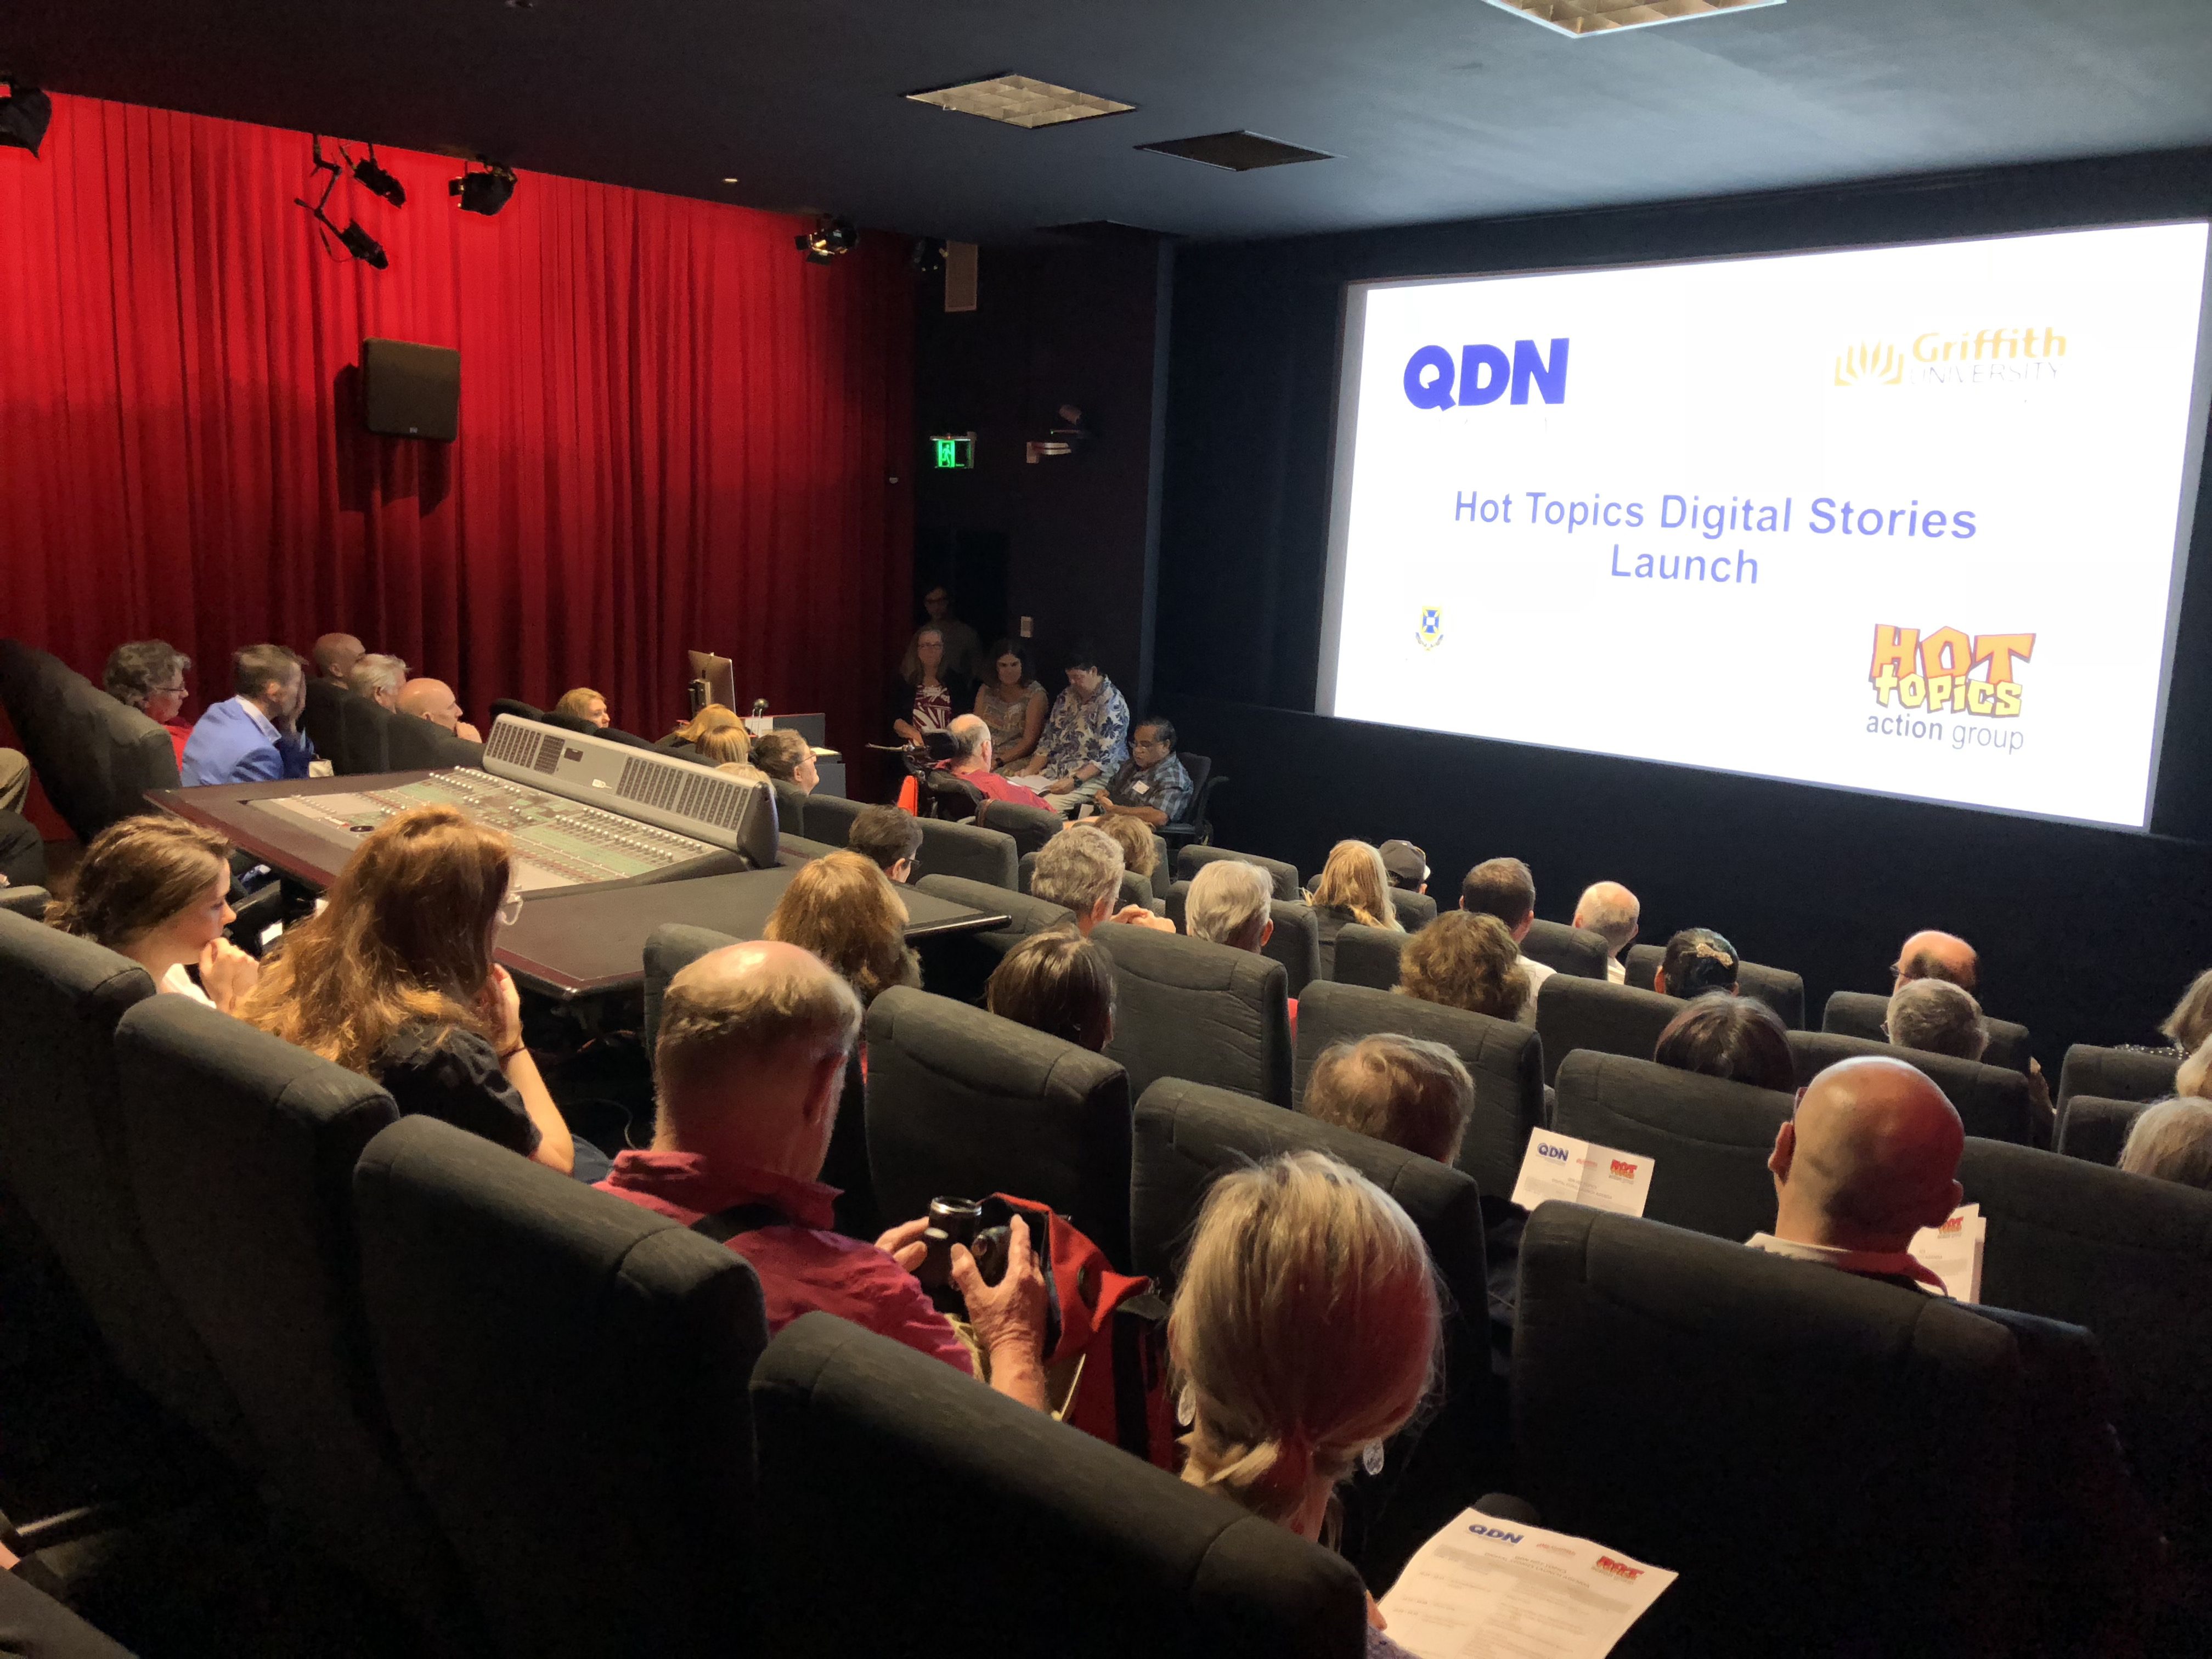 QDN Hot Topics Digital Stories launch - people sitting in large room watching presentation